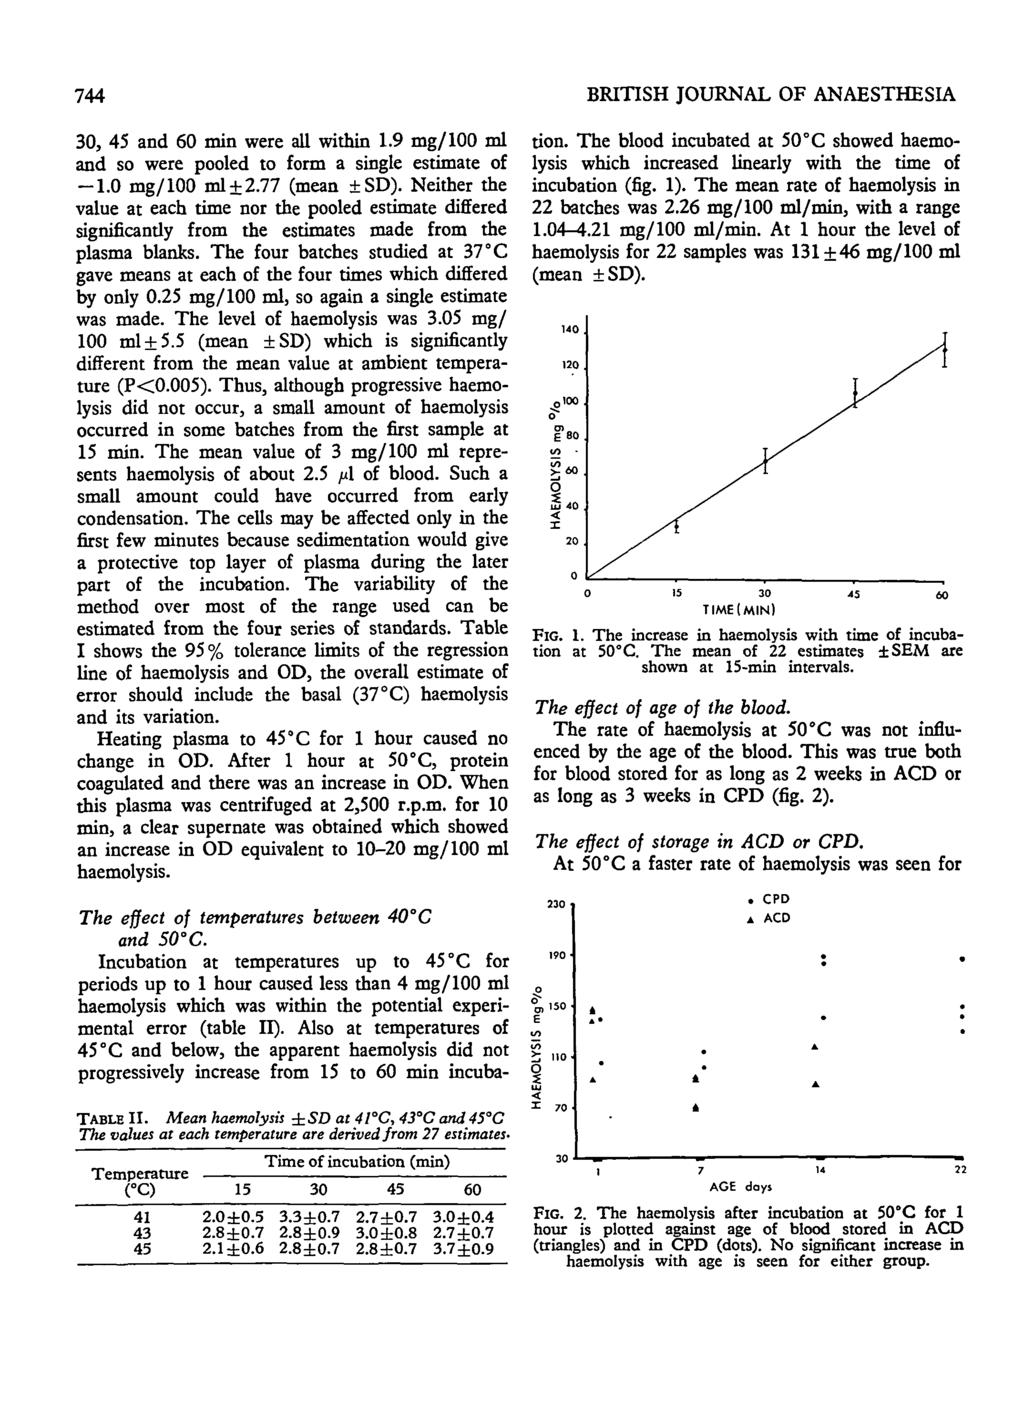 744 BRITISH JOURNAL OF ANAESTHESIA 30, 45 and 60 min were all within 1.9 mg/100 ml and so were pooled to form a single estimate of 1.0 mg/100 ml ±2.77 (mean ±SD).